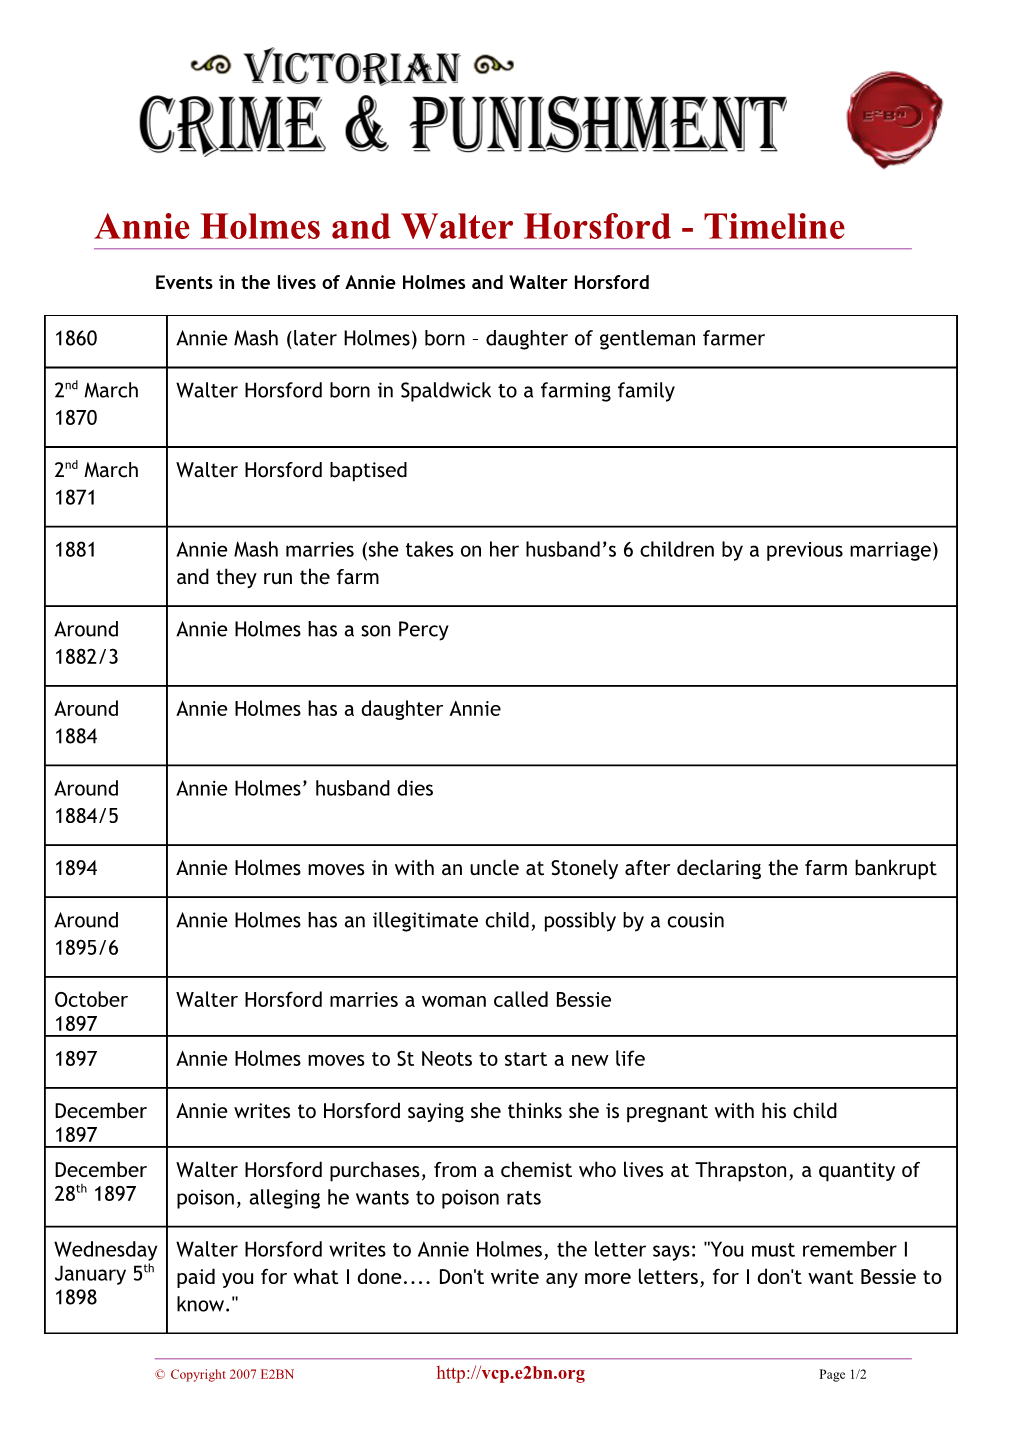 Annie Holmes and Walter Horsford - Timeline